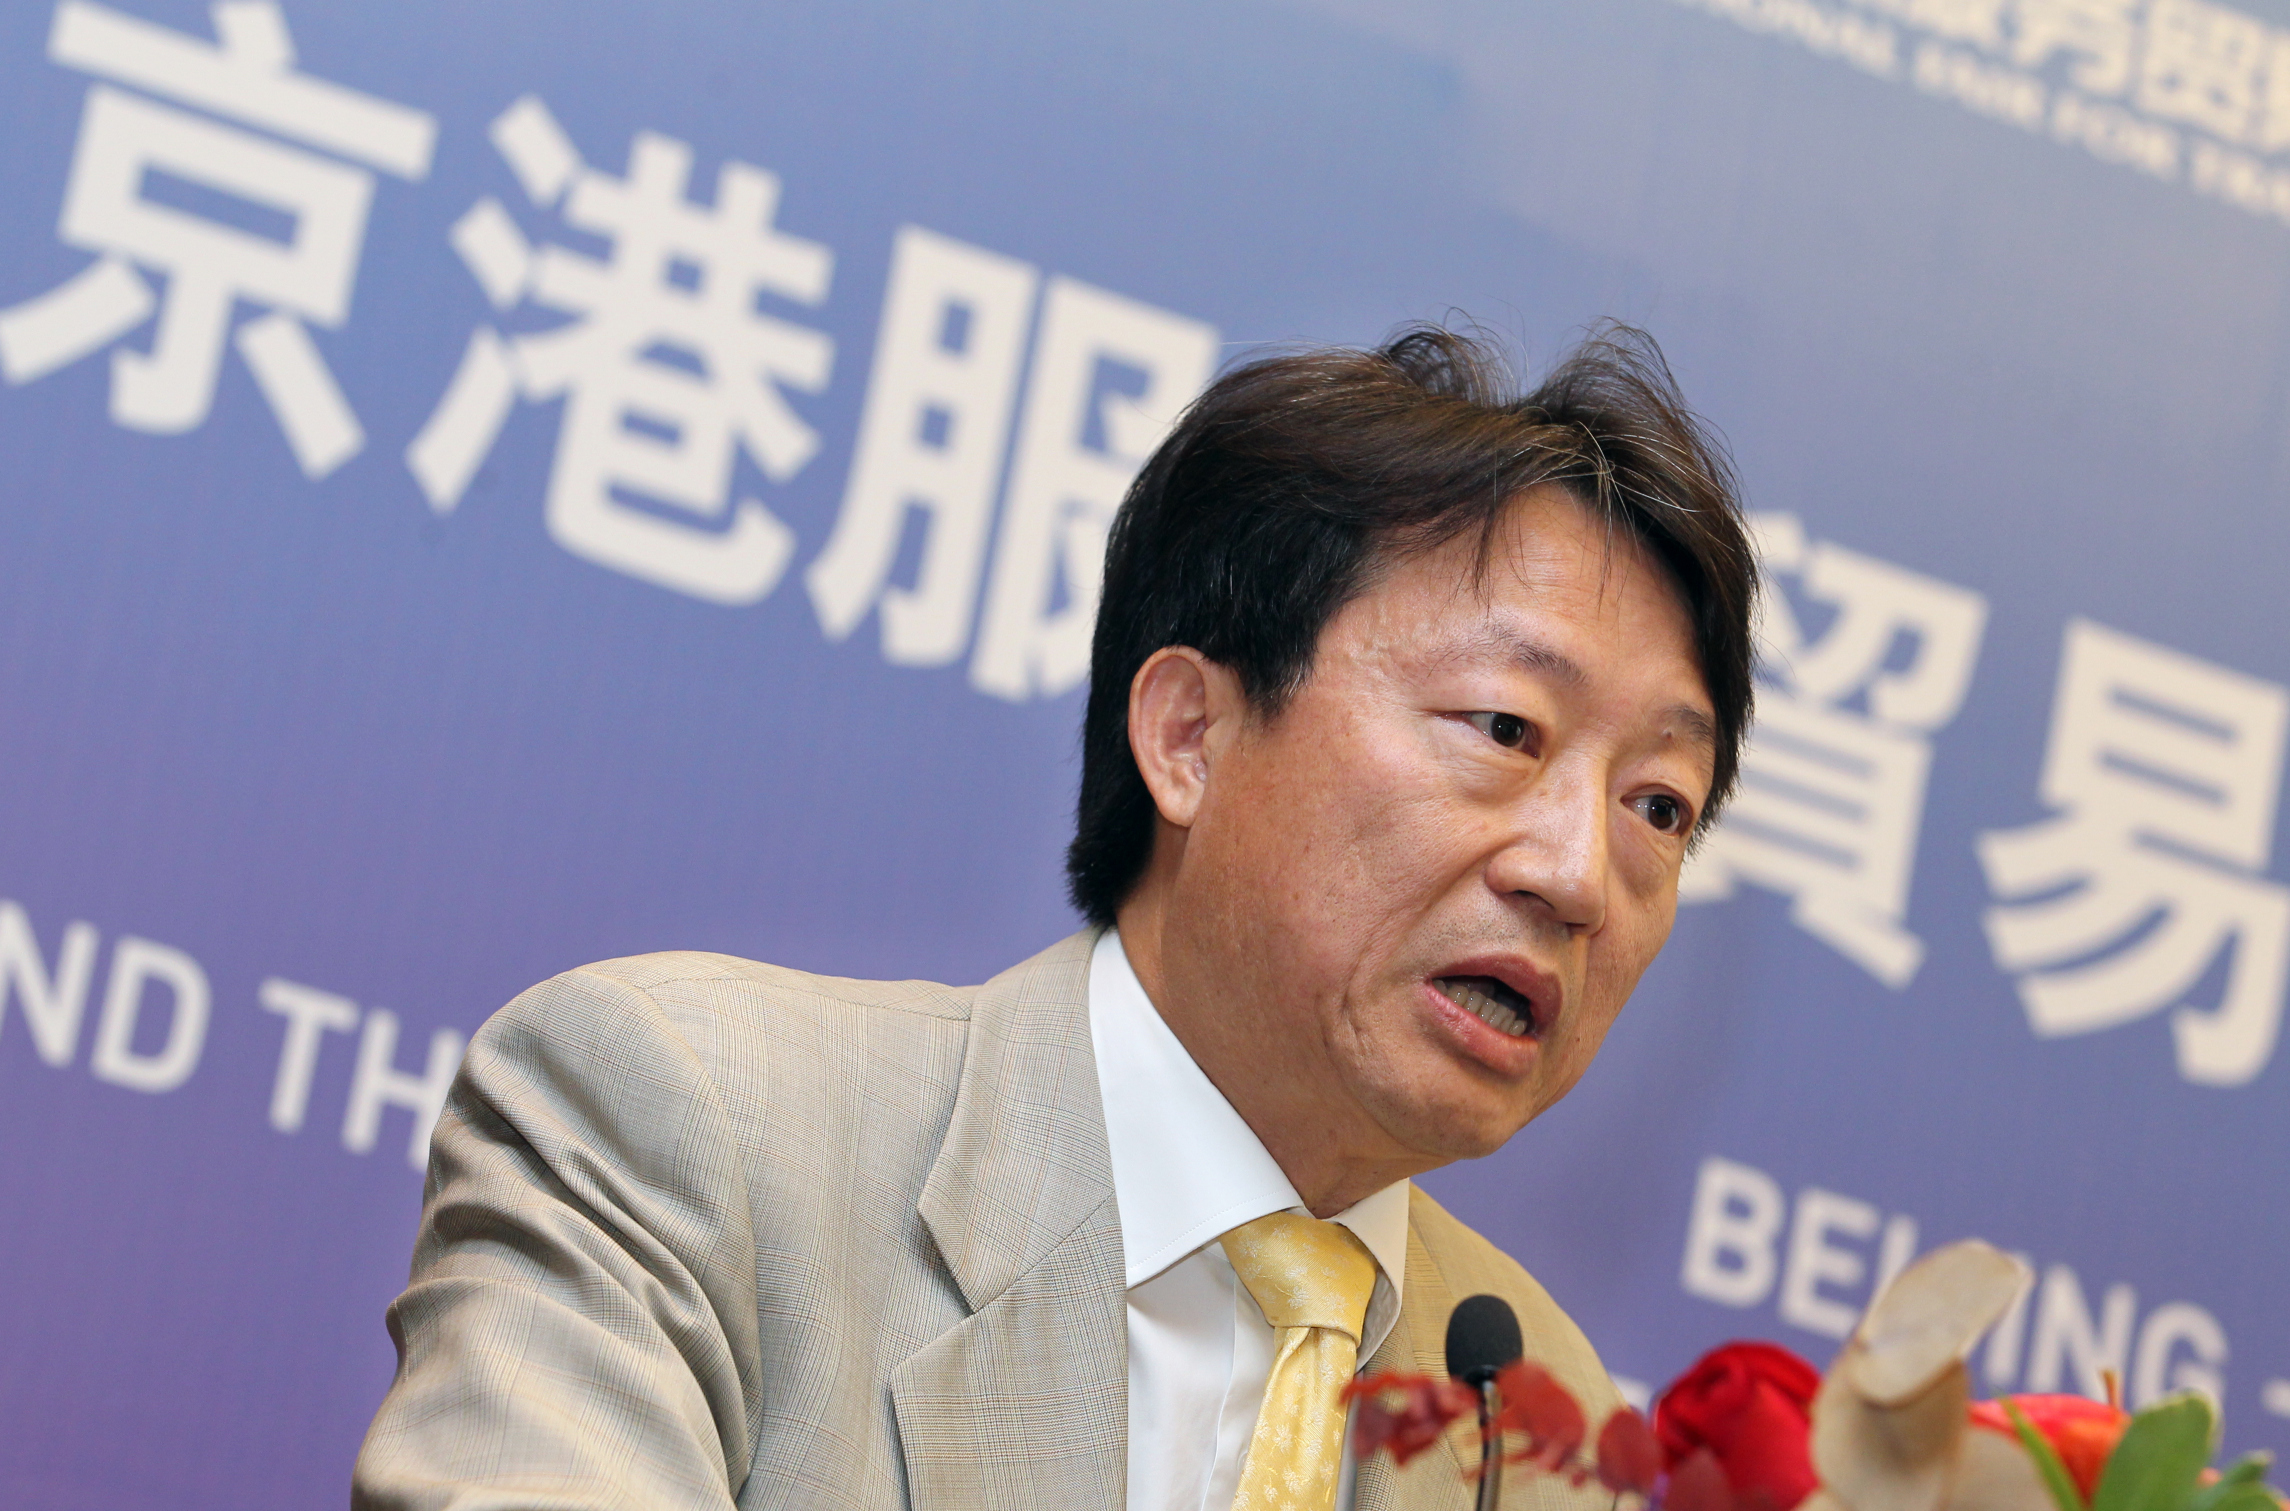 Law Society president Ambrose Lam was widely criticised for refusing to give a sound bite in English. Photo: K. Y. Cheng